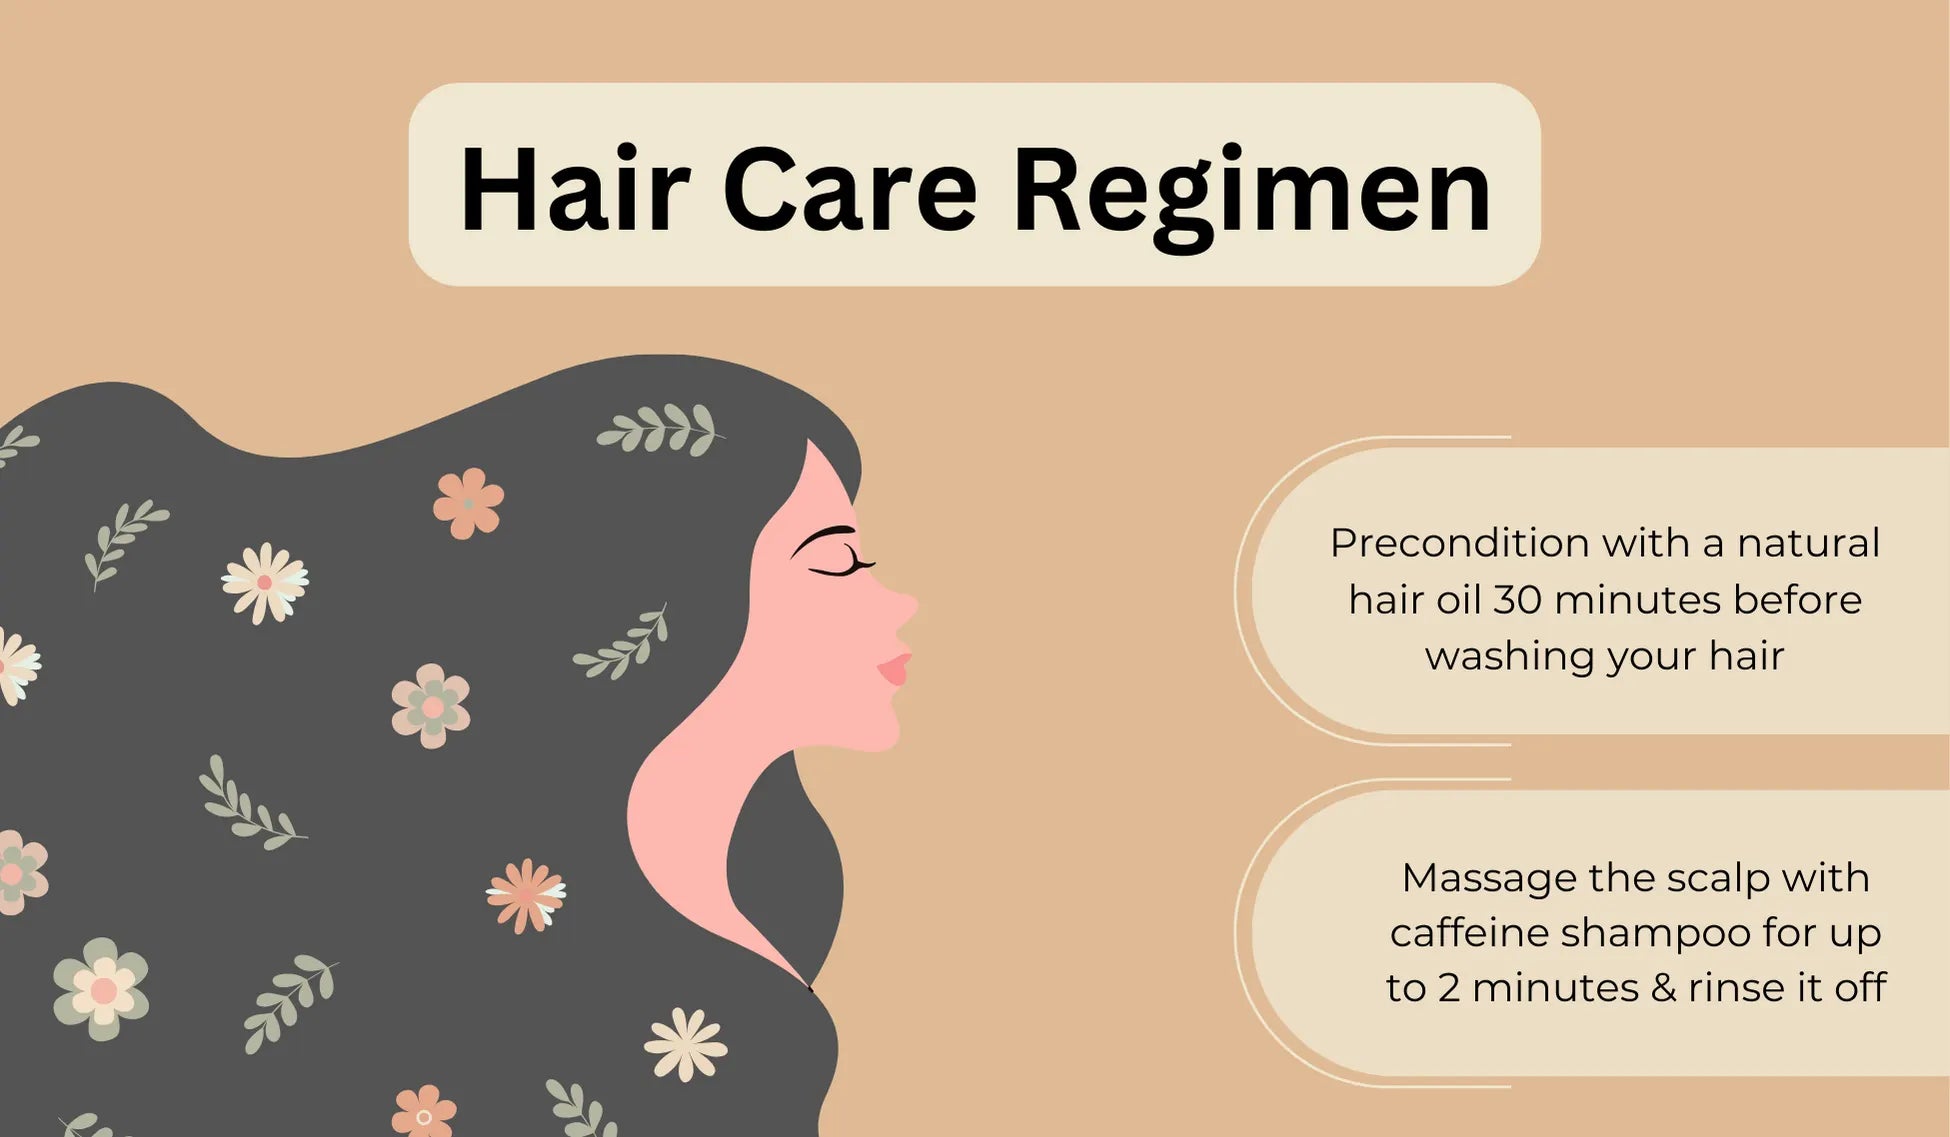 hair care regimen to support hair and scalp health